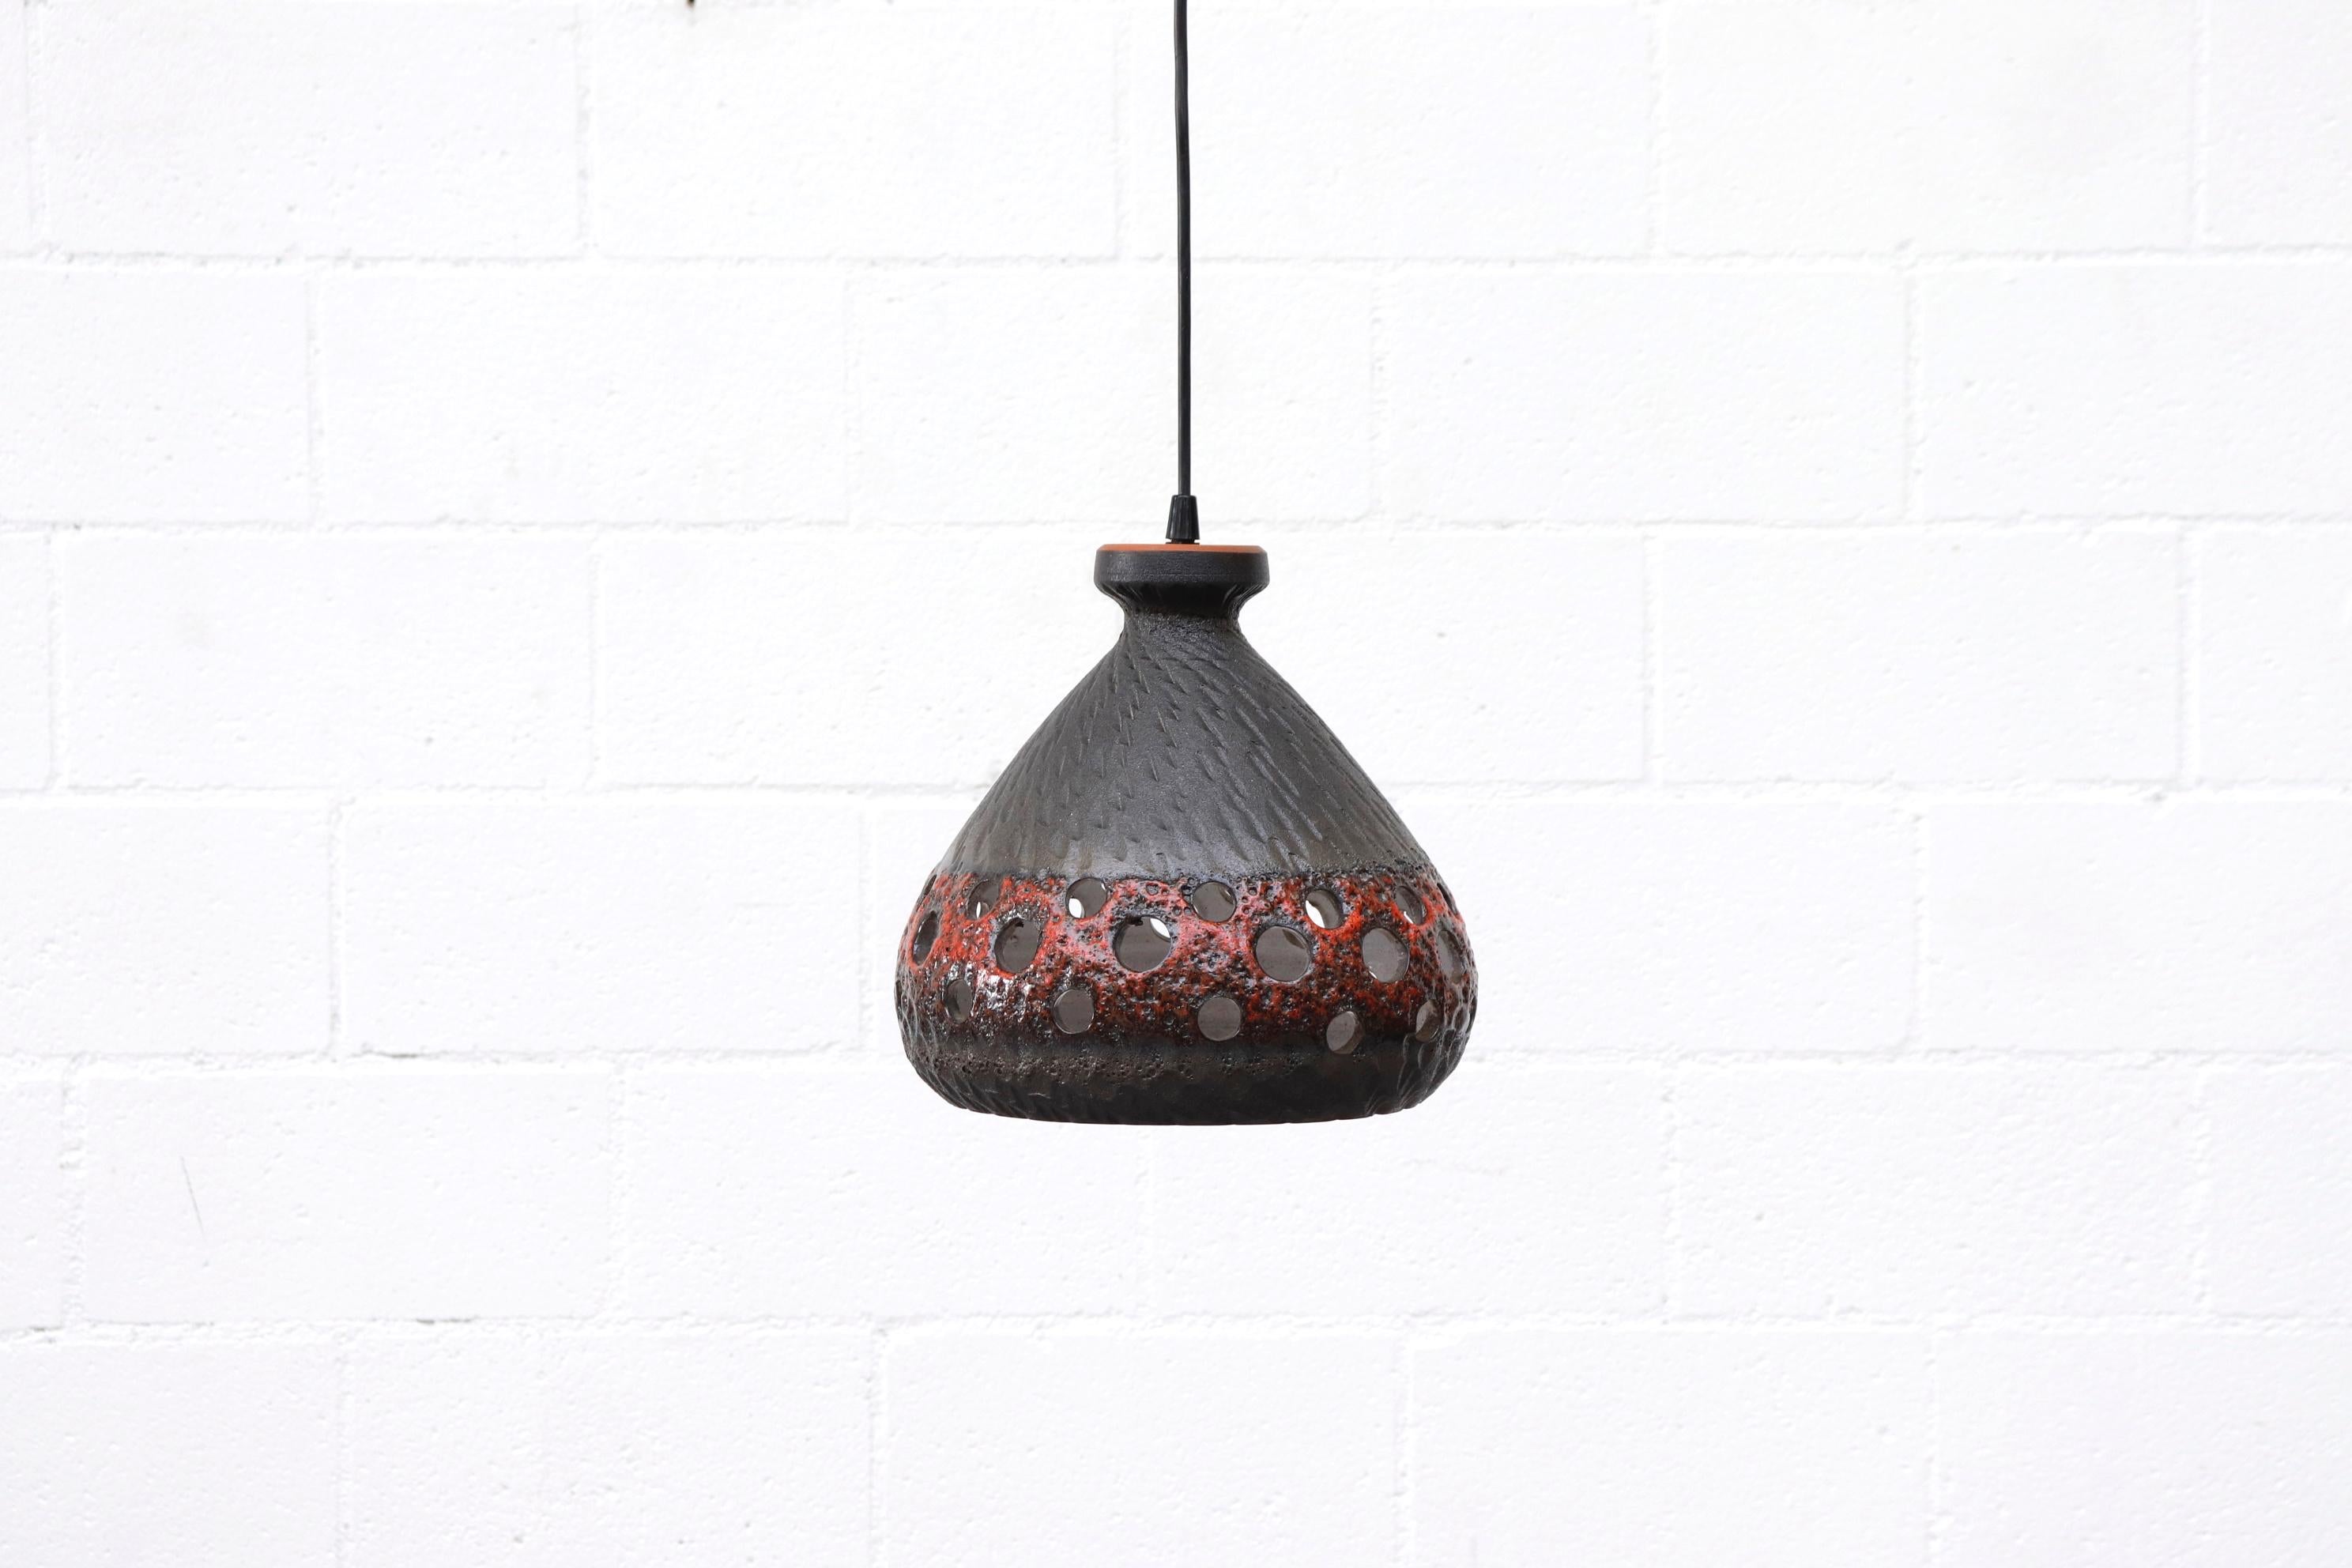 1970s midcentury MOD ceramic bell pendant lamp with circle cut-outs for Ambient light. Outside is charcoal grey with red lava glaze, and the inside is a natural bone white glaze. Uses regular light bulb. Original condition. Other various ceramic